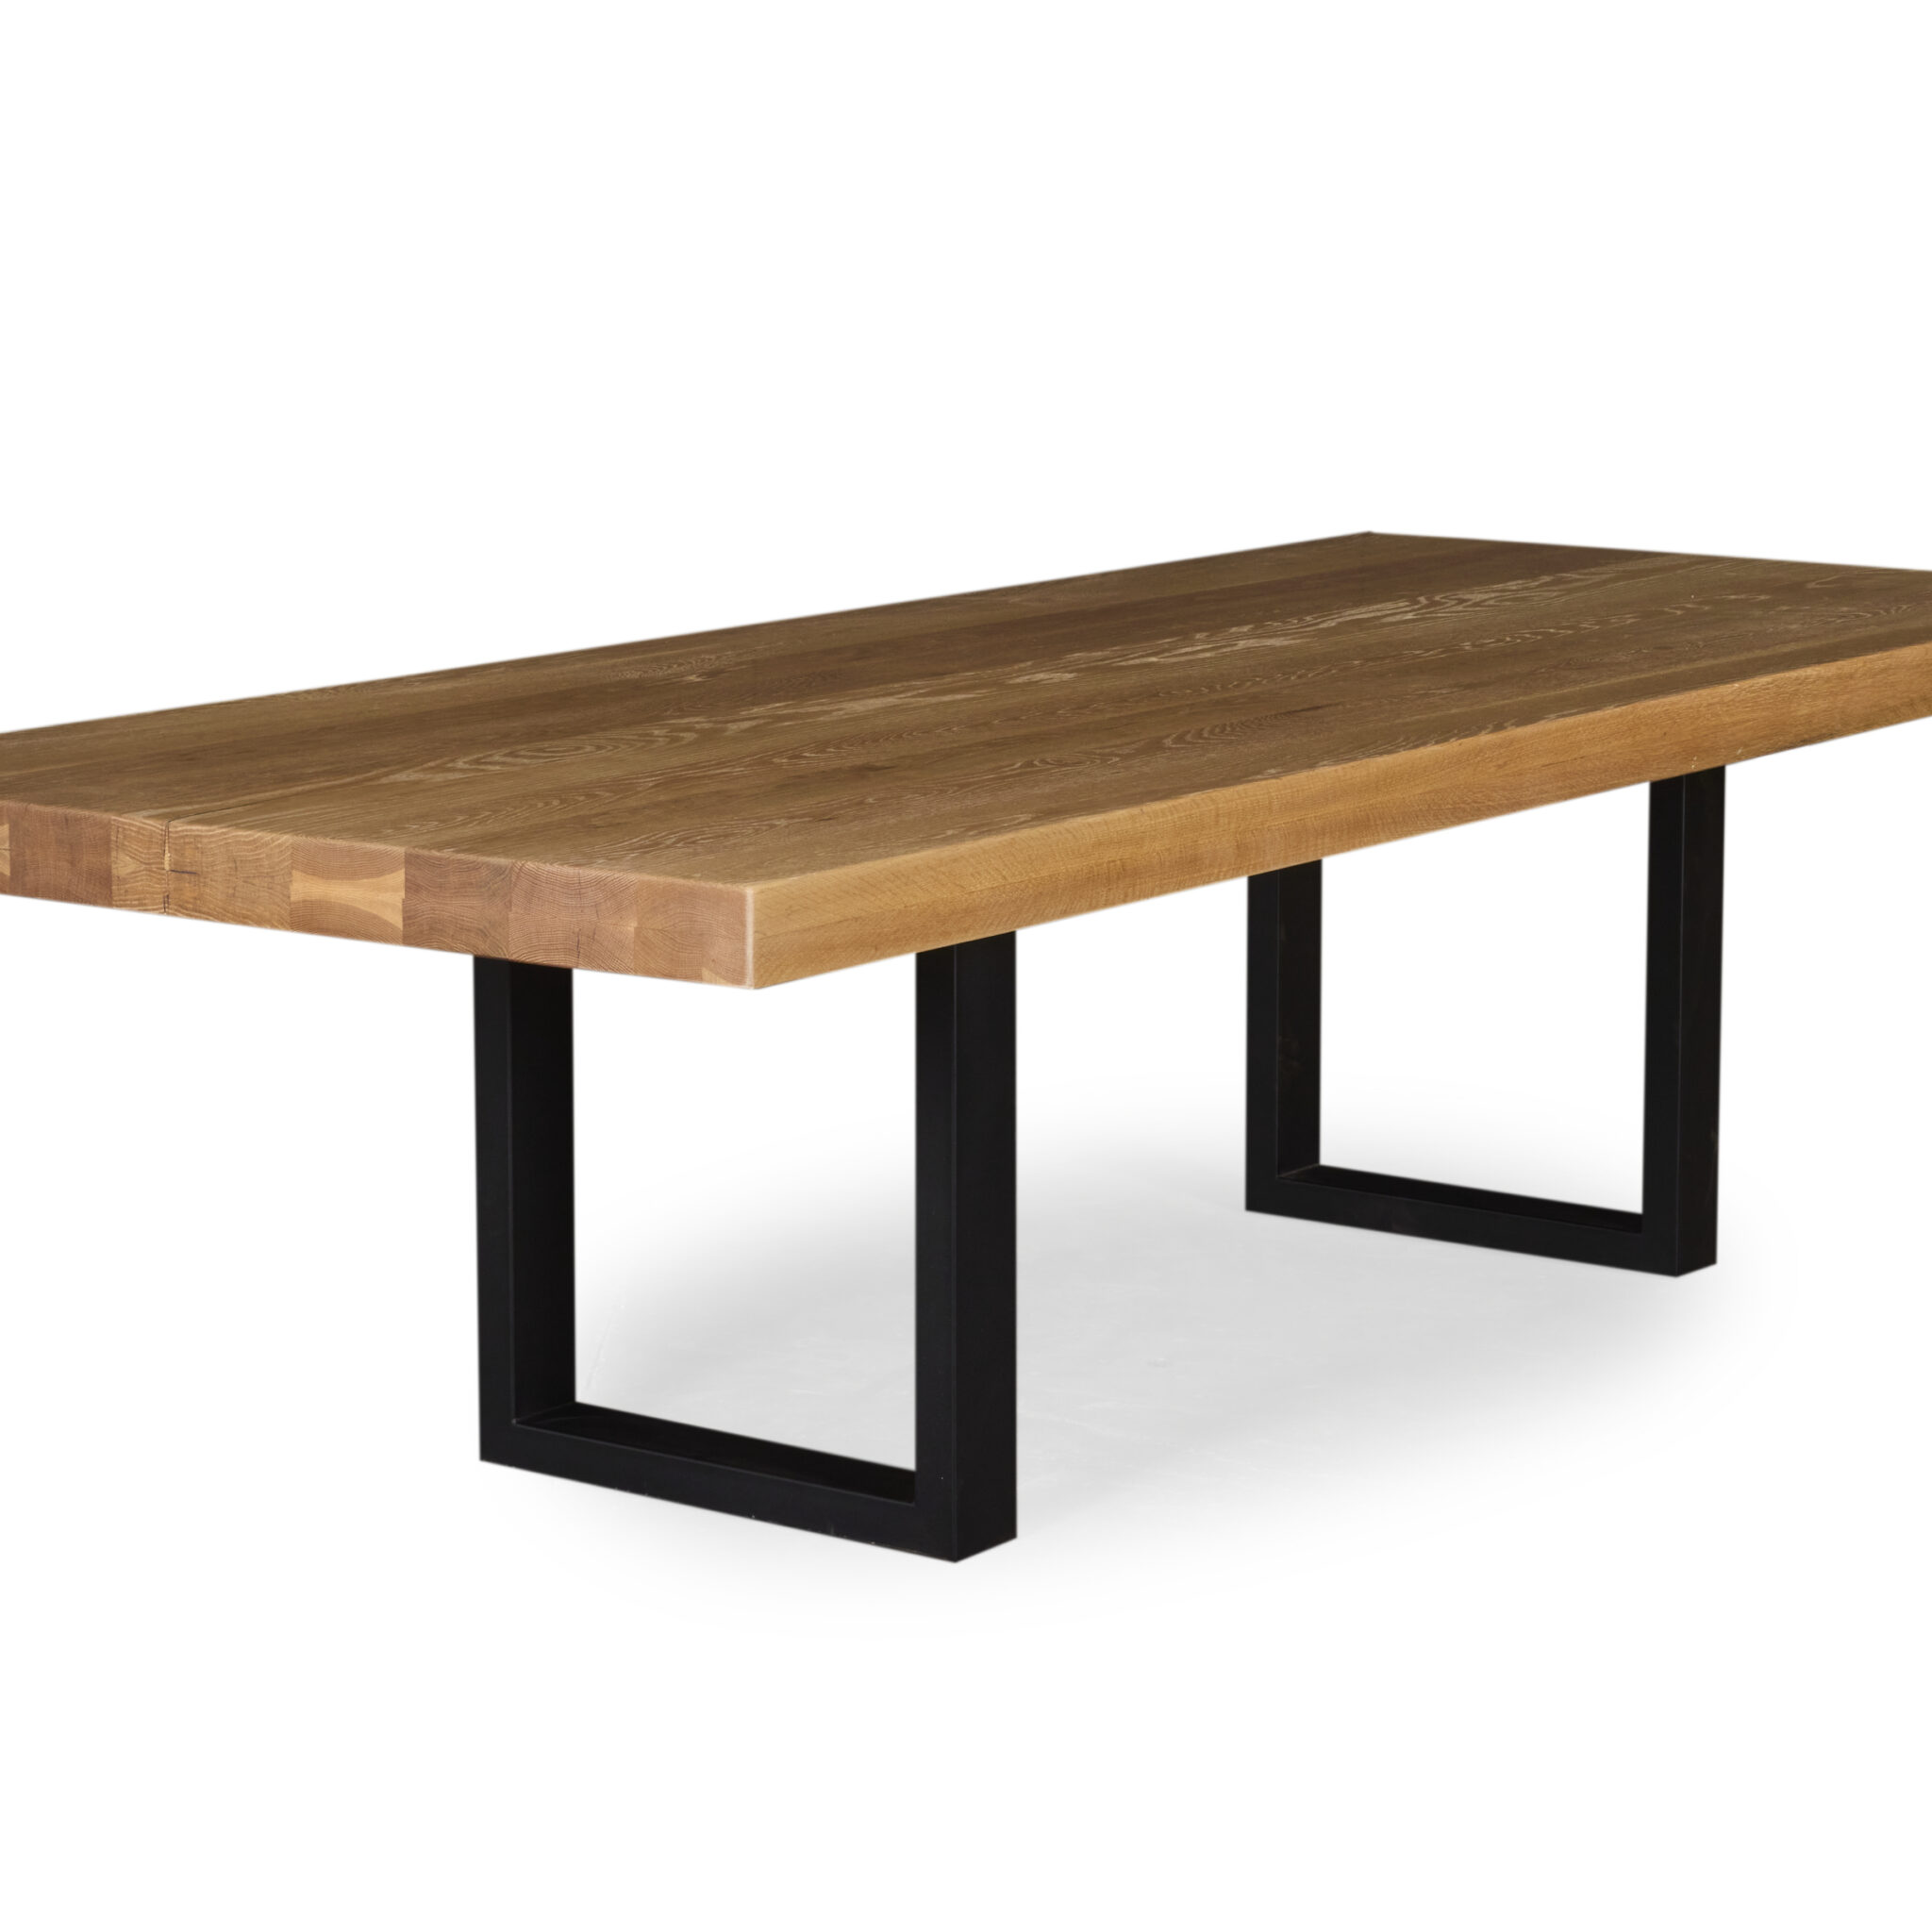 Mode Dining Table - American Oak, U-leg timber base, white oil finish - In-stock for immediate delivery.